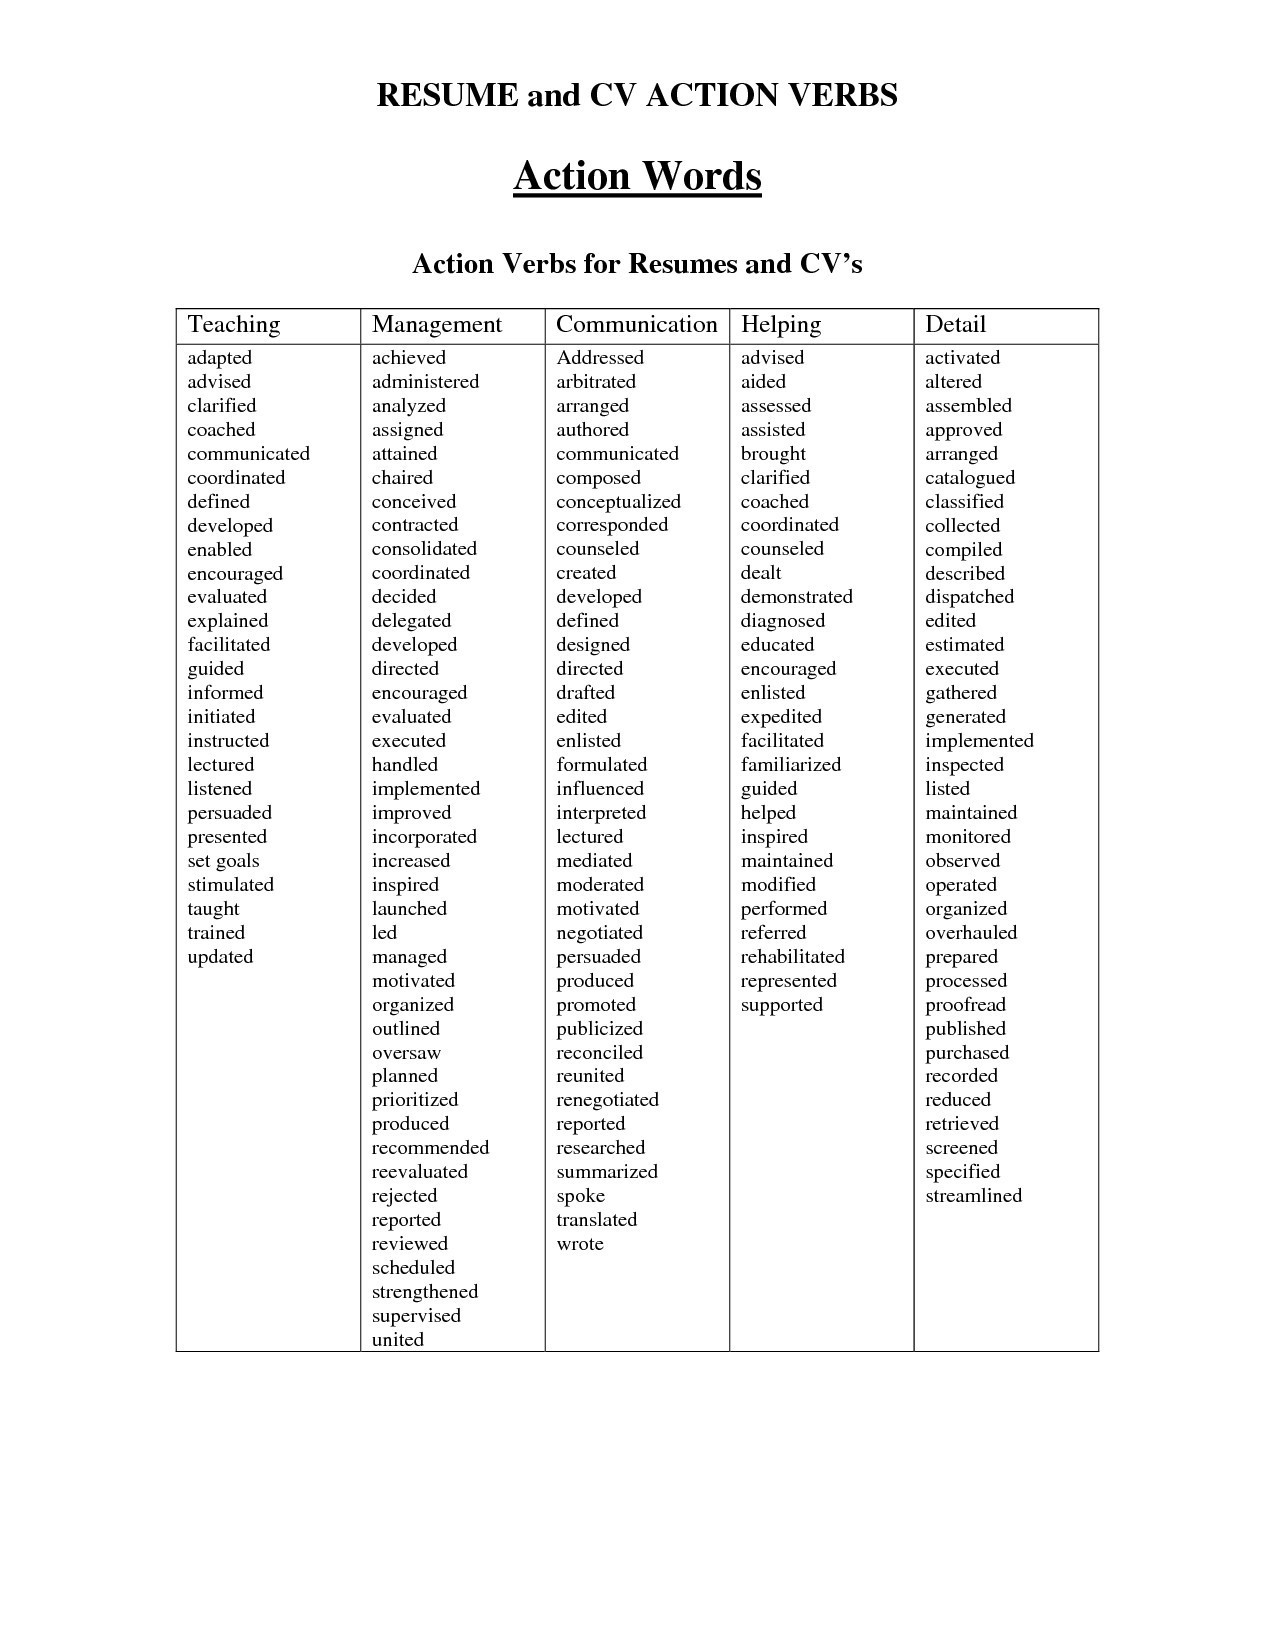 Resume Words To Use Words To Use In Resume To Describe Yourself Elegant Action Words